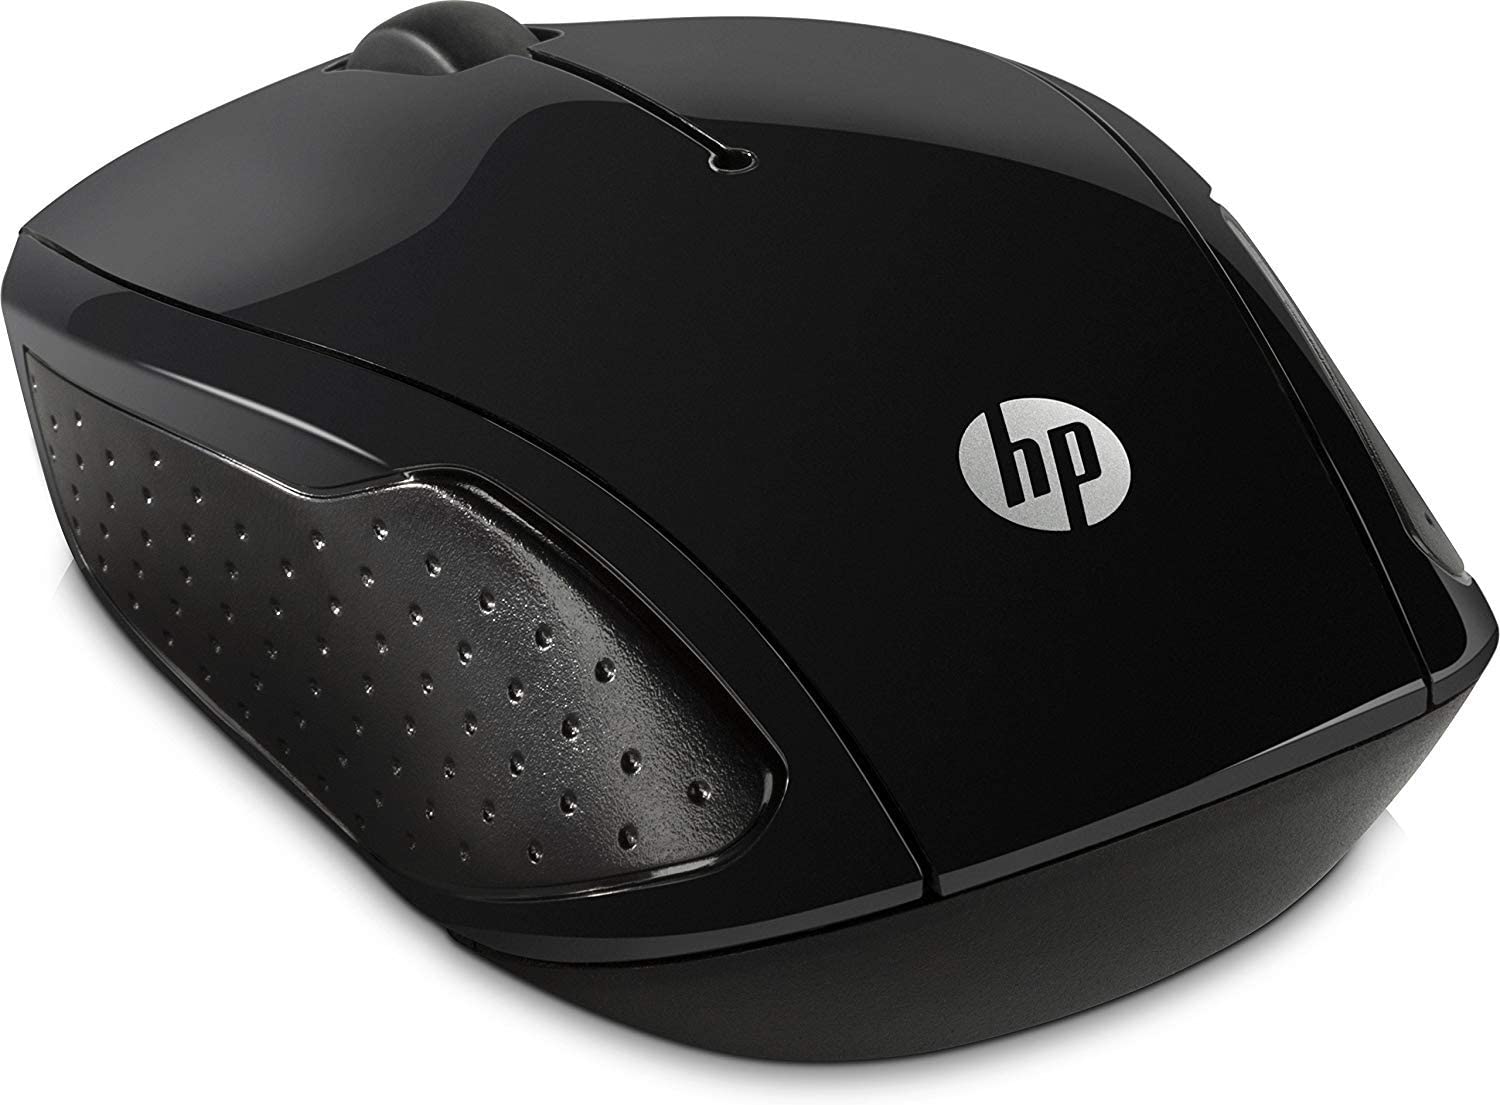 Hp Wireless Mouse-Black